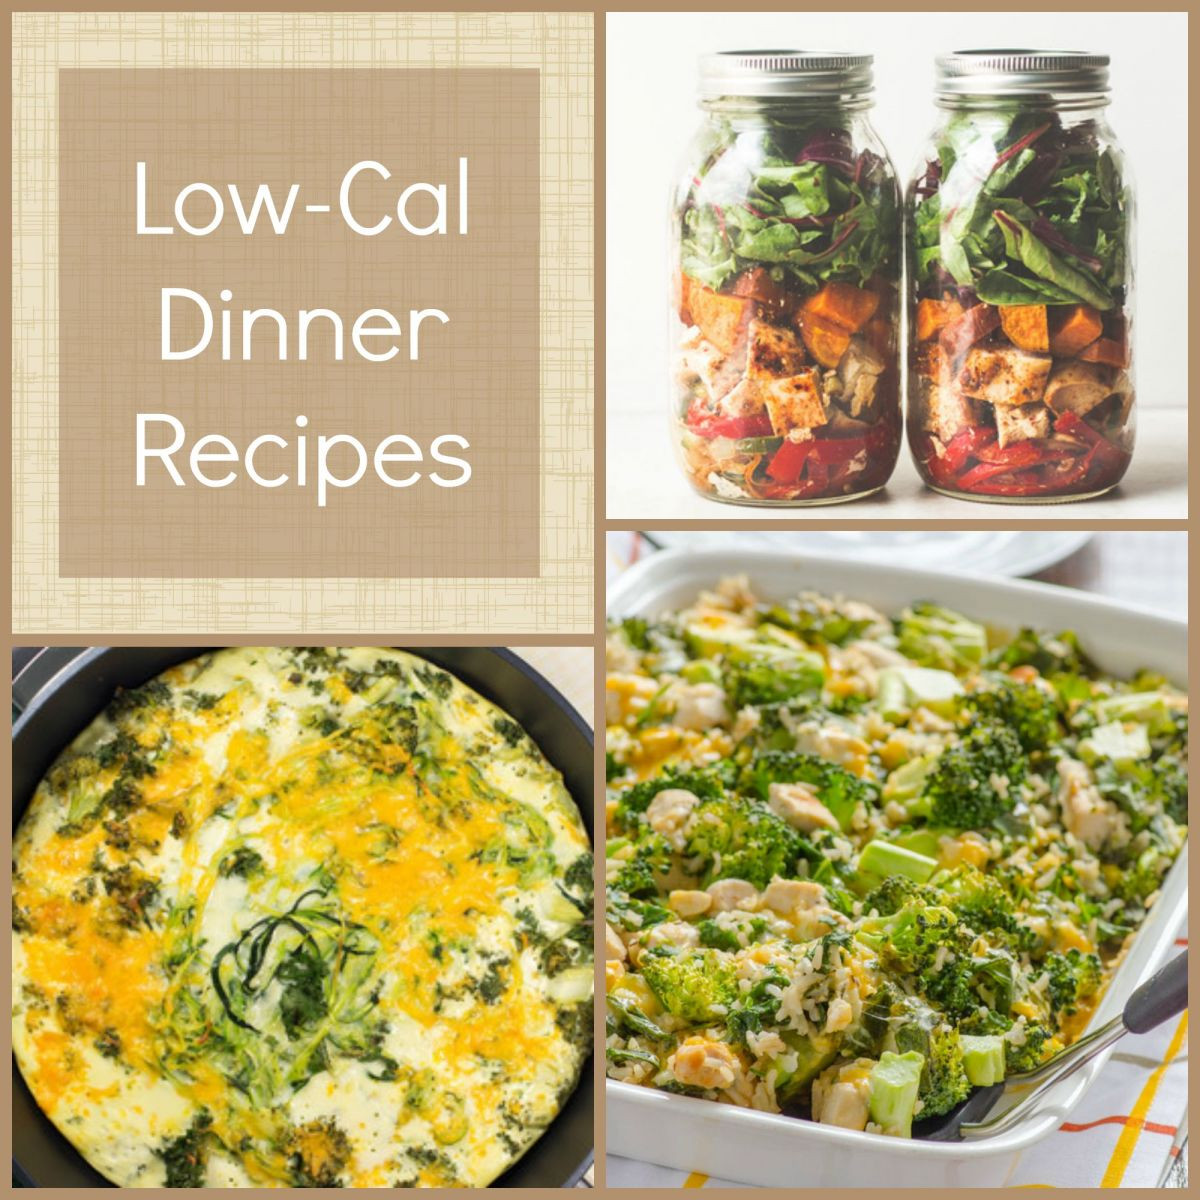 Low Calorie Low Carb Recipes For Dinner
 20 Low Calorie Dinner Recipes